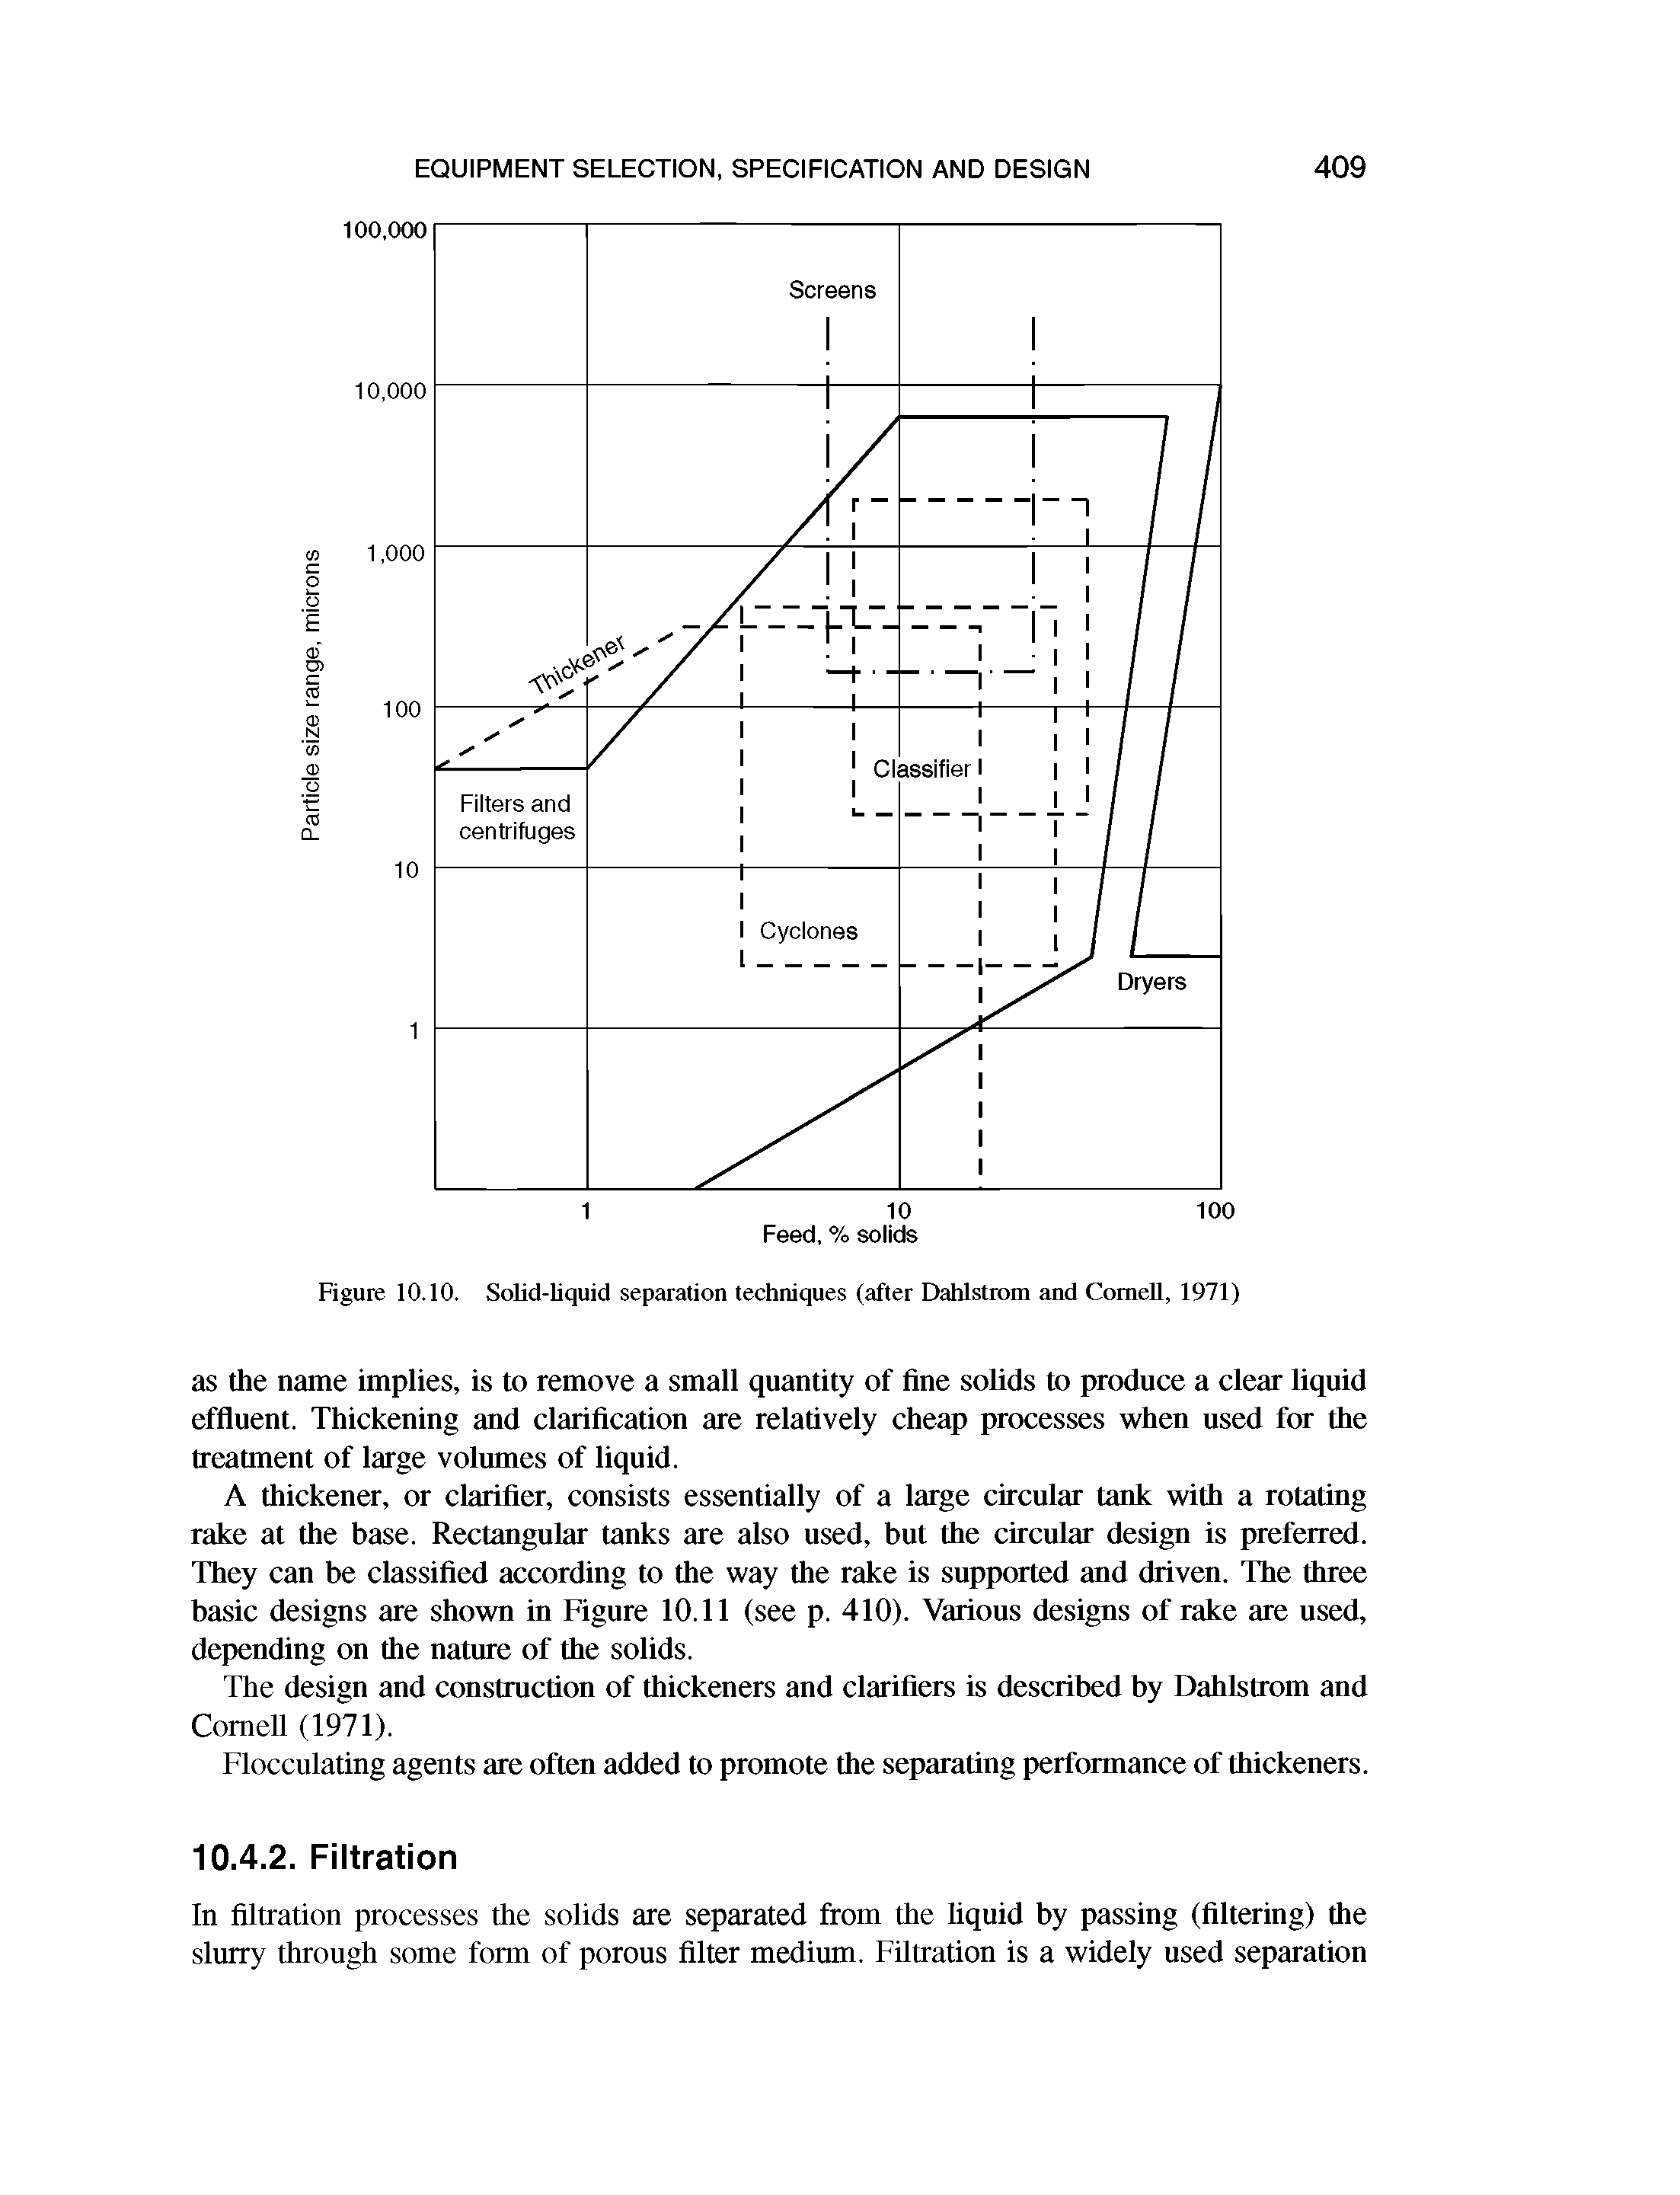 Figure 10.10. Solid-liquid separation techniques (after Dahlstrom and Cornell, 1971)...